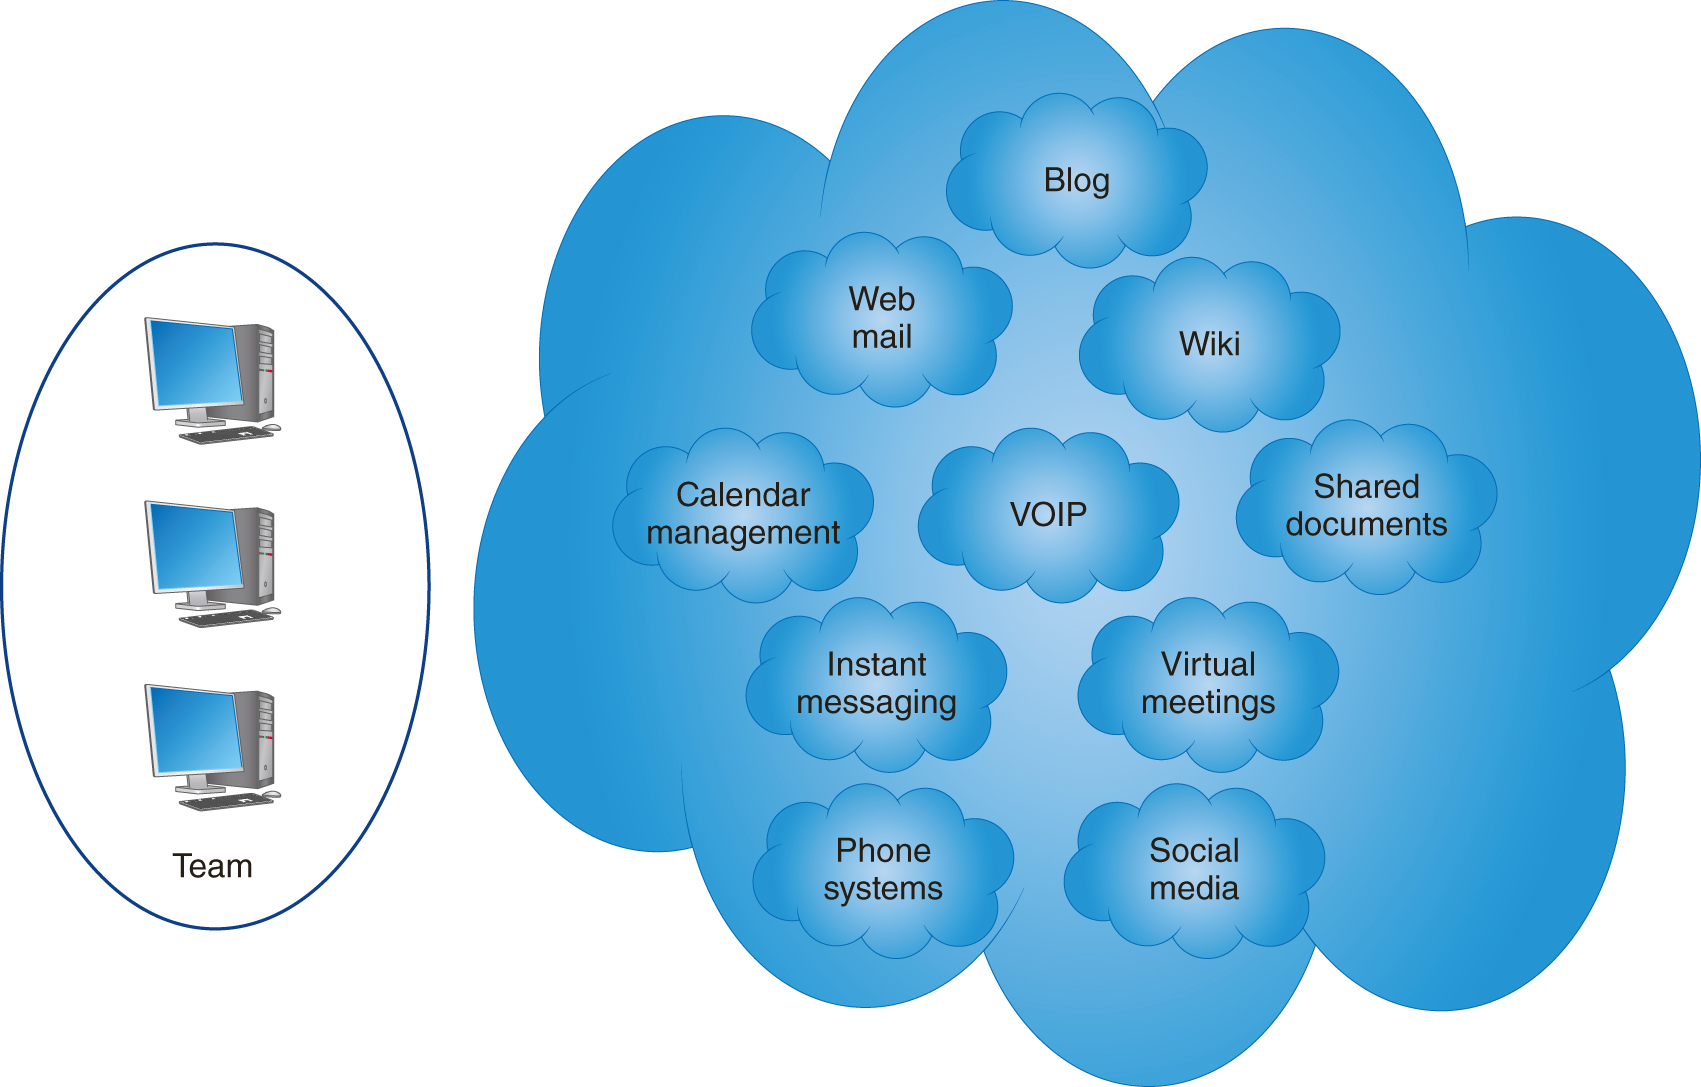 Several users represent Team on the left. A larger cloud consists of smaller clouds representing blog, Wiki, web mail, V o I P, shared documents, calendar management, instant messaging, virtual meetings, phone systems, and social media on the right.
